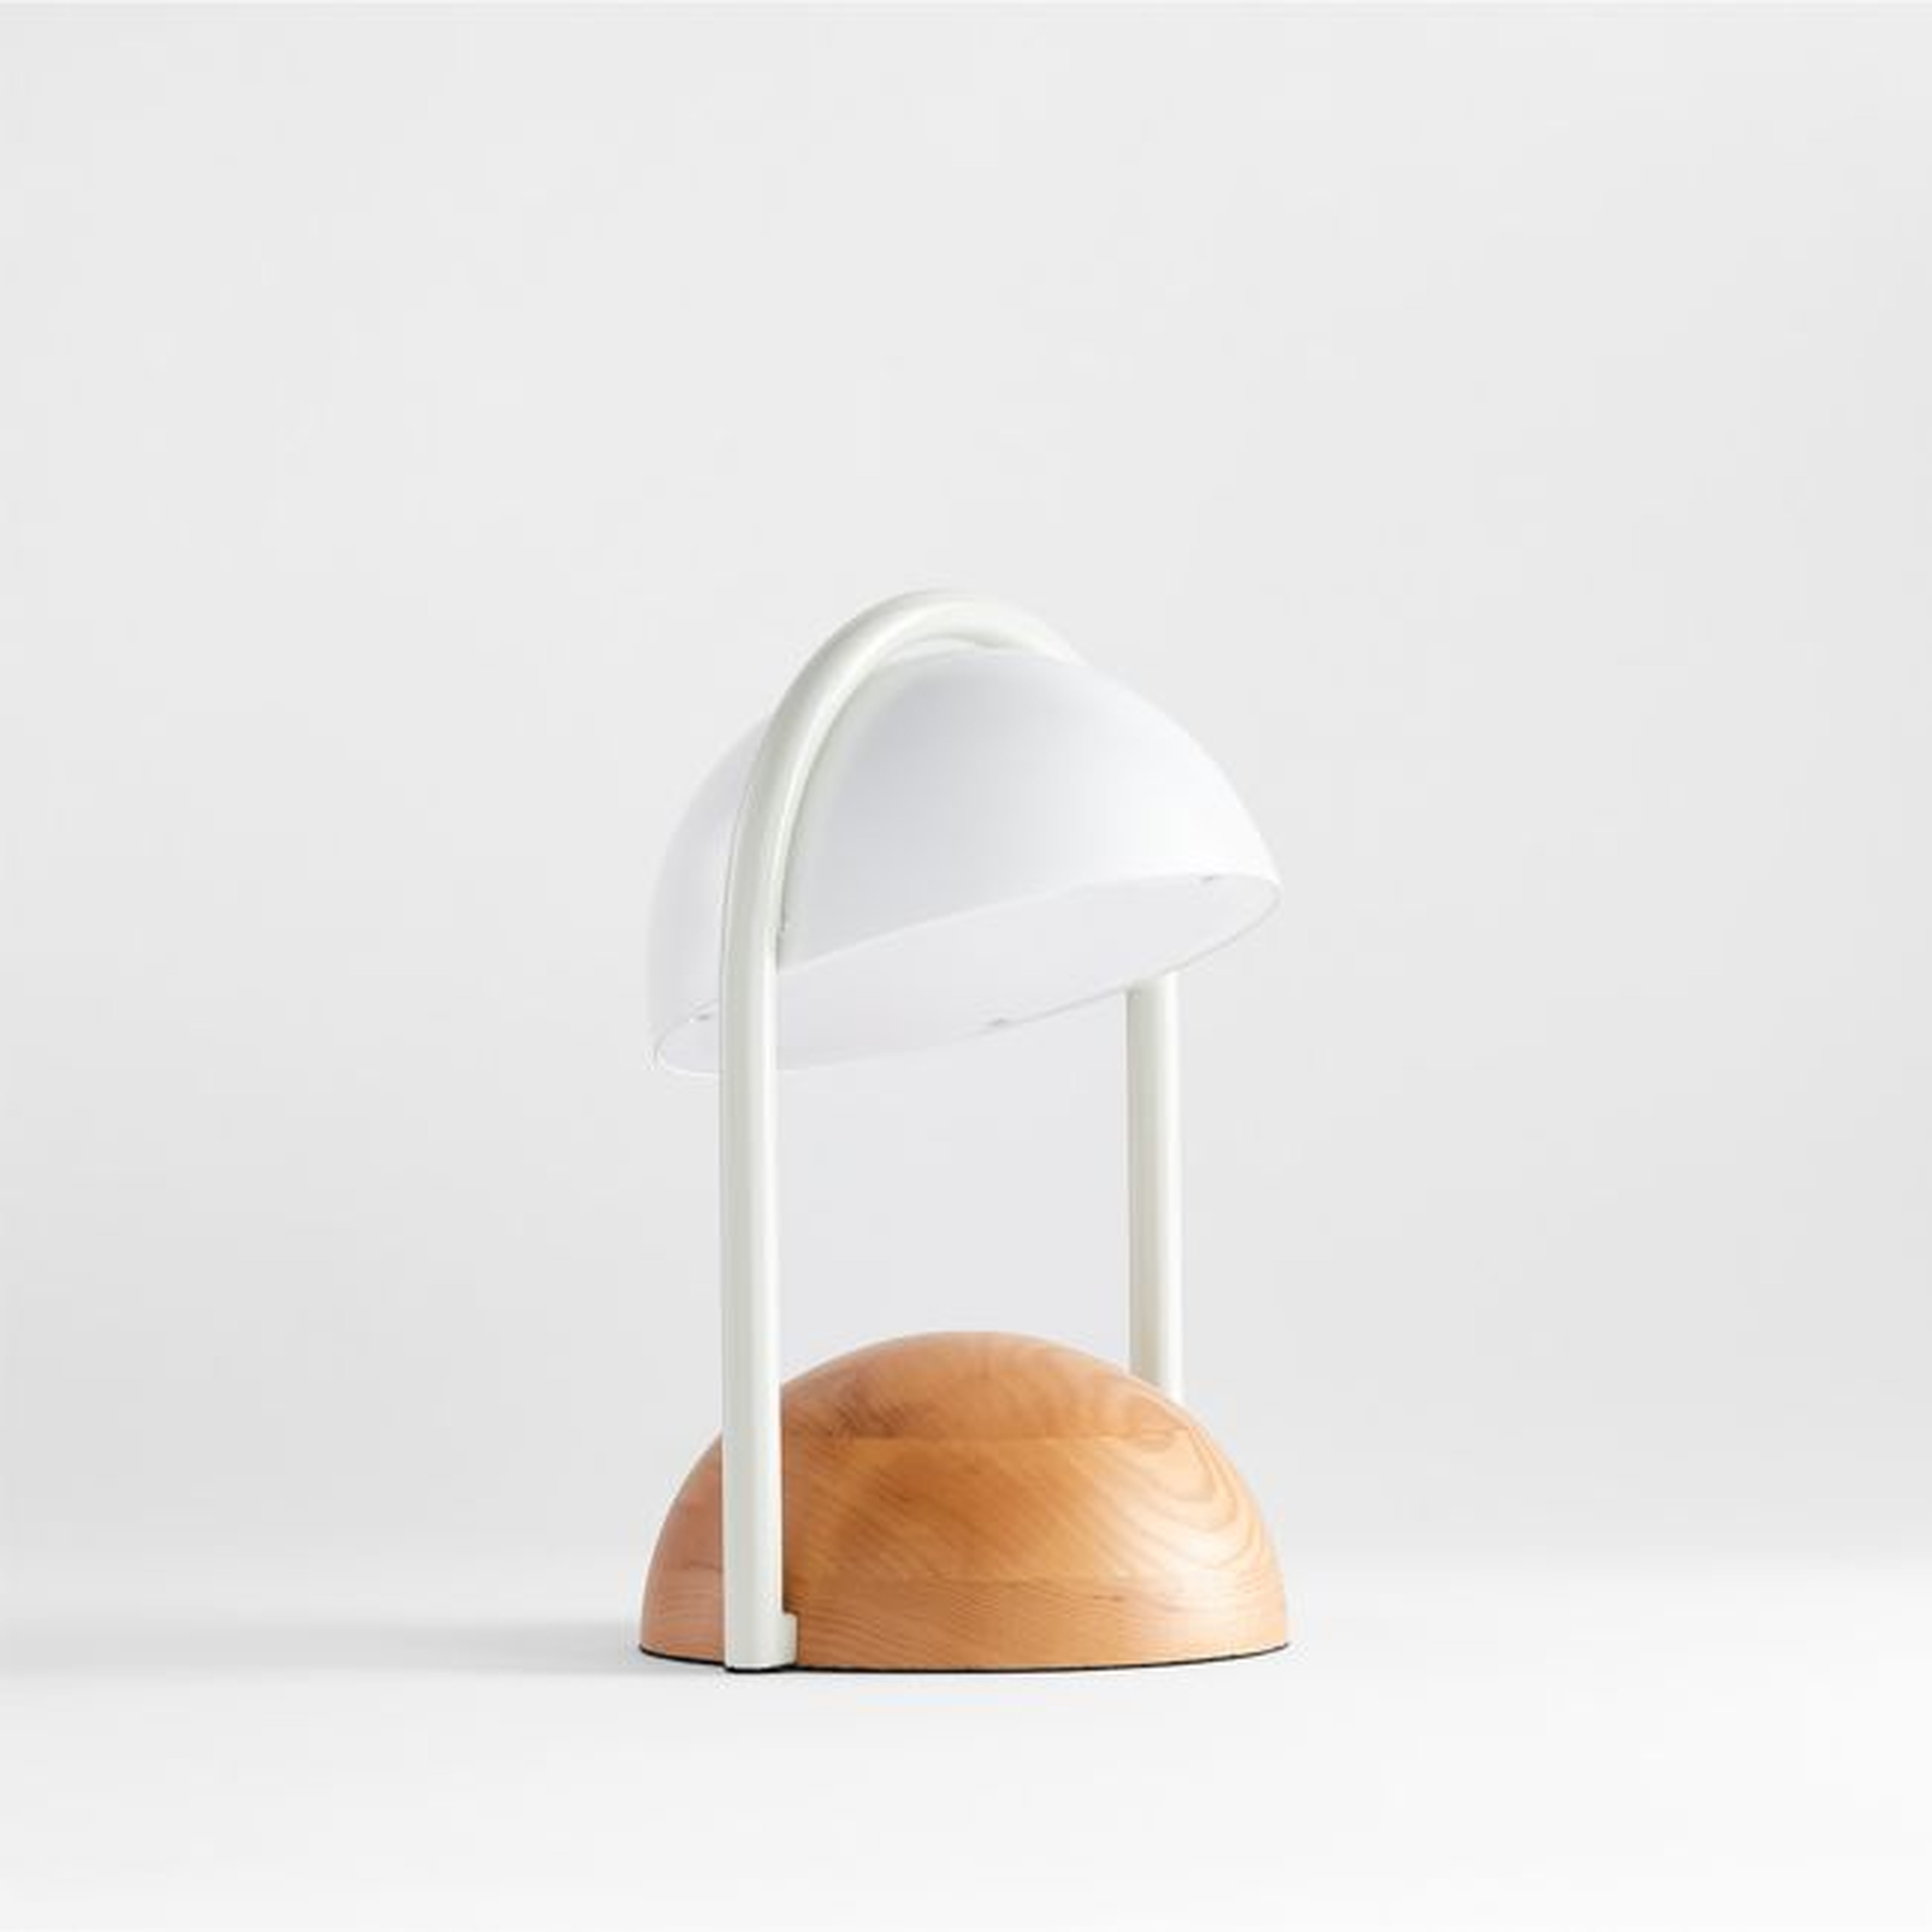 Kids White Shroom Table Lamp - Crate and Barrel